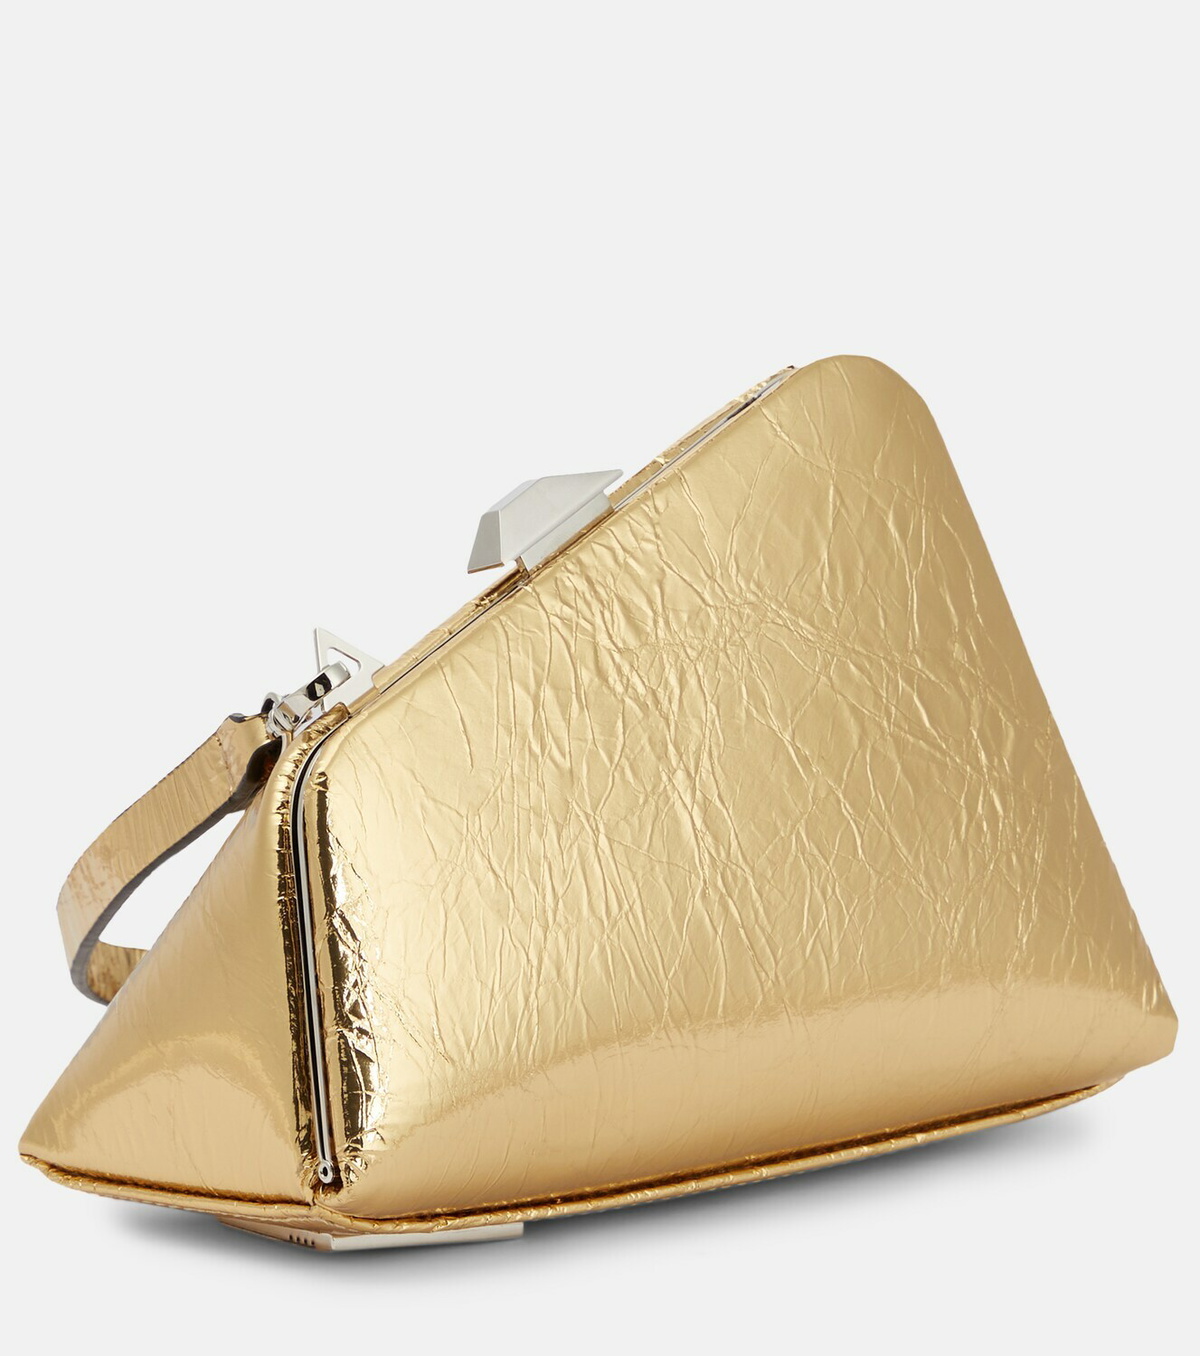 Midnight Mini Embellished Leather Clutch in Yellow - The Attico